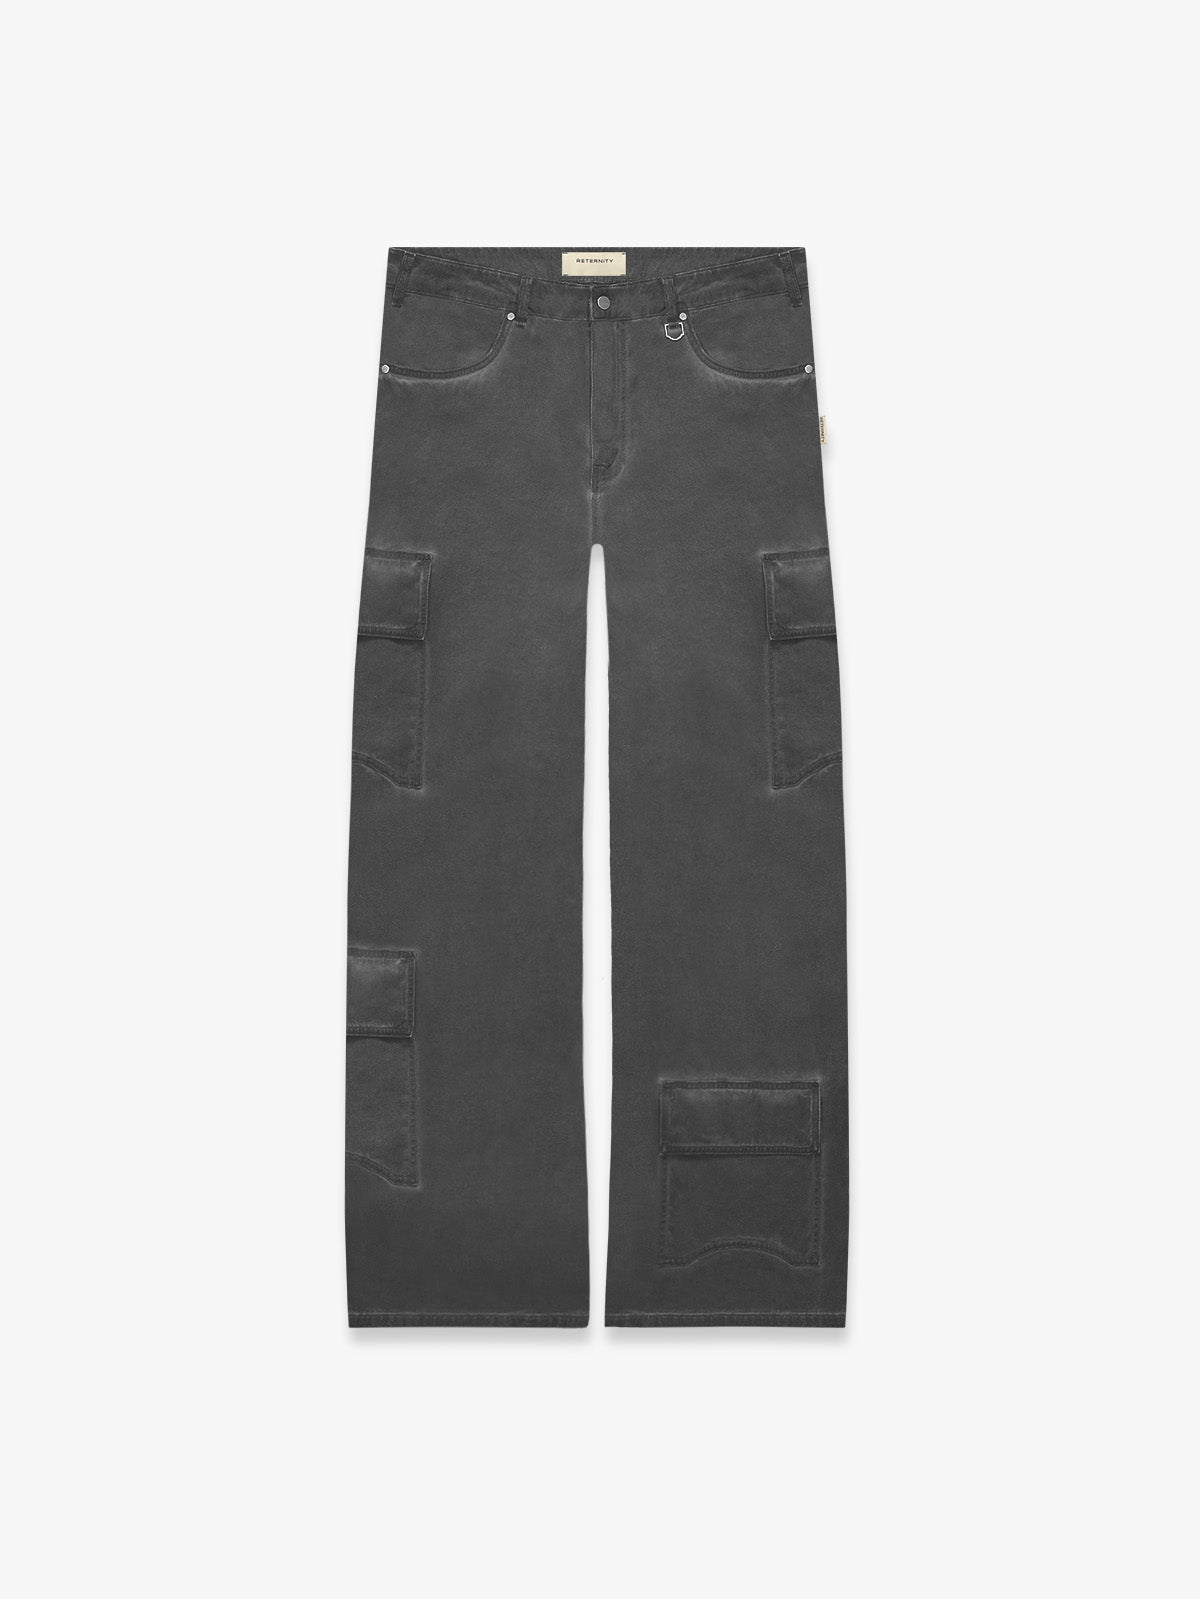 OIL WASHED CARGO PANTS - GREY